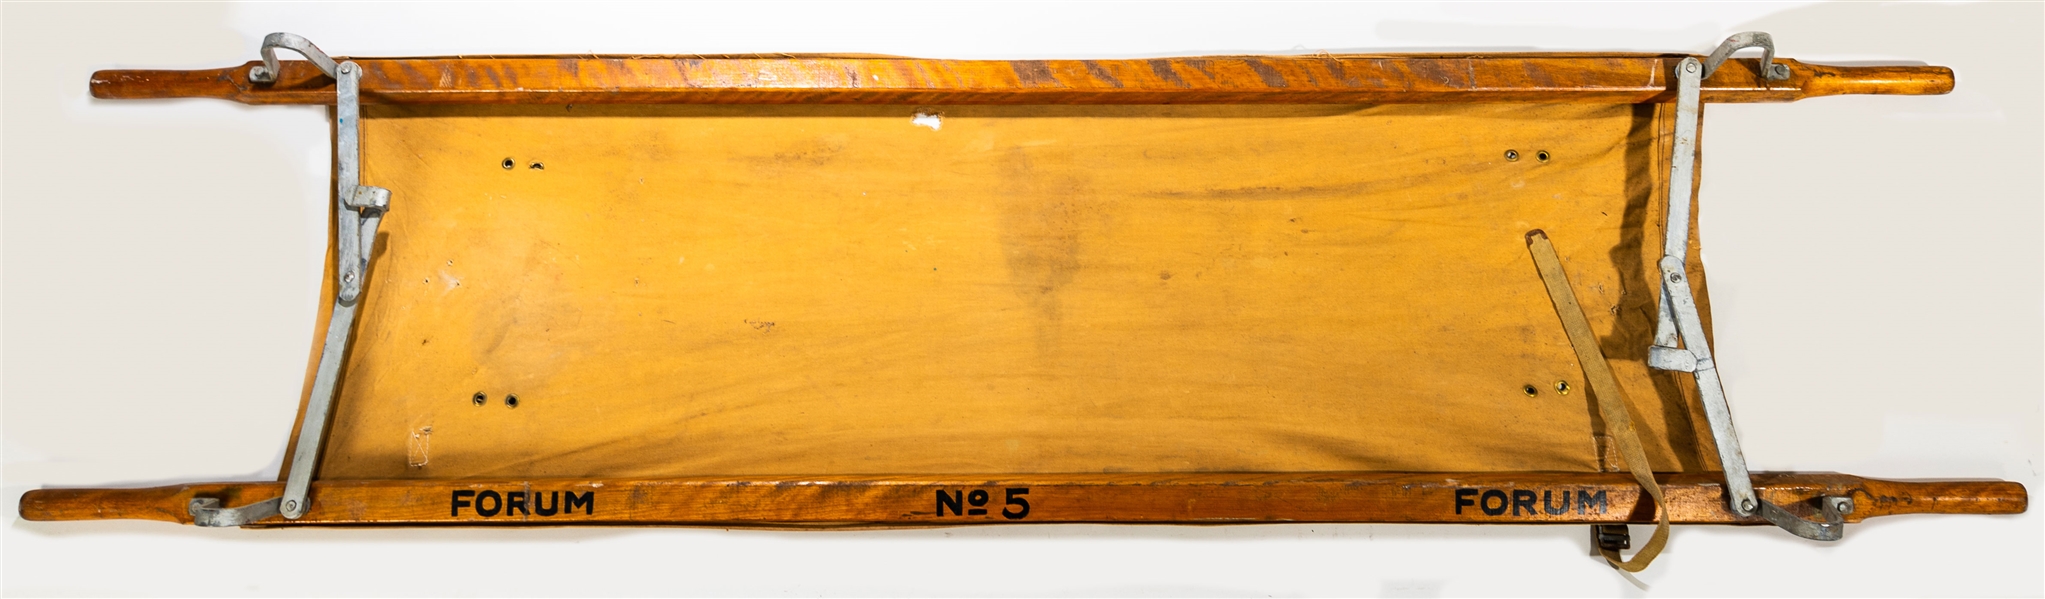 Montreal Forum 1930s Wood and Canvas Stretcher (23" x 93")